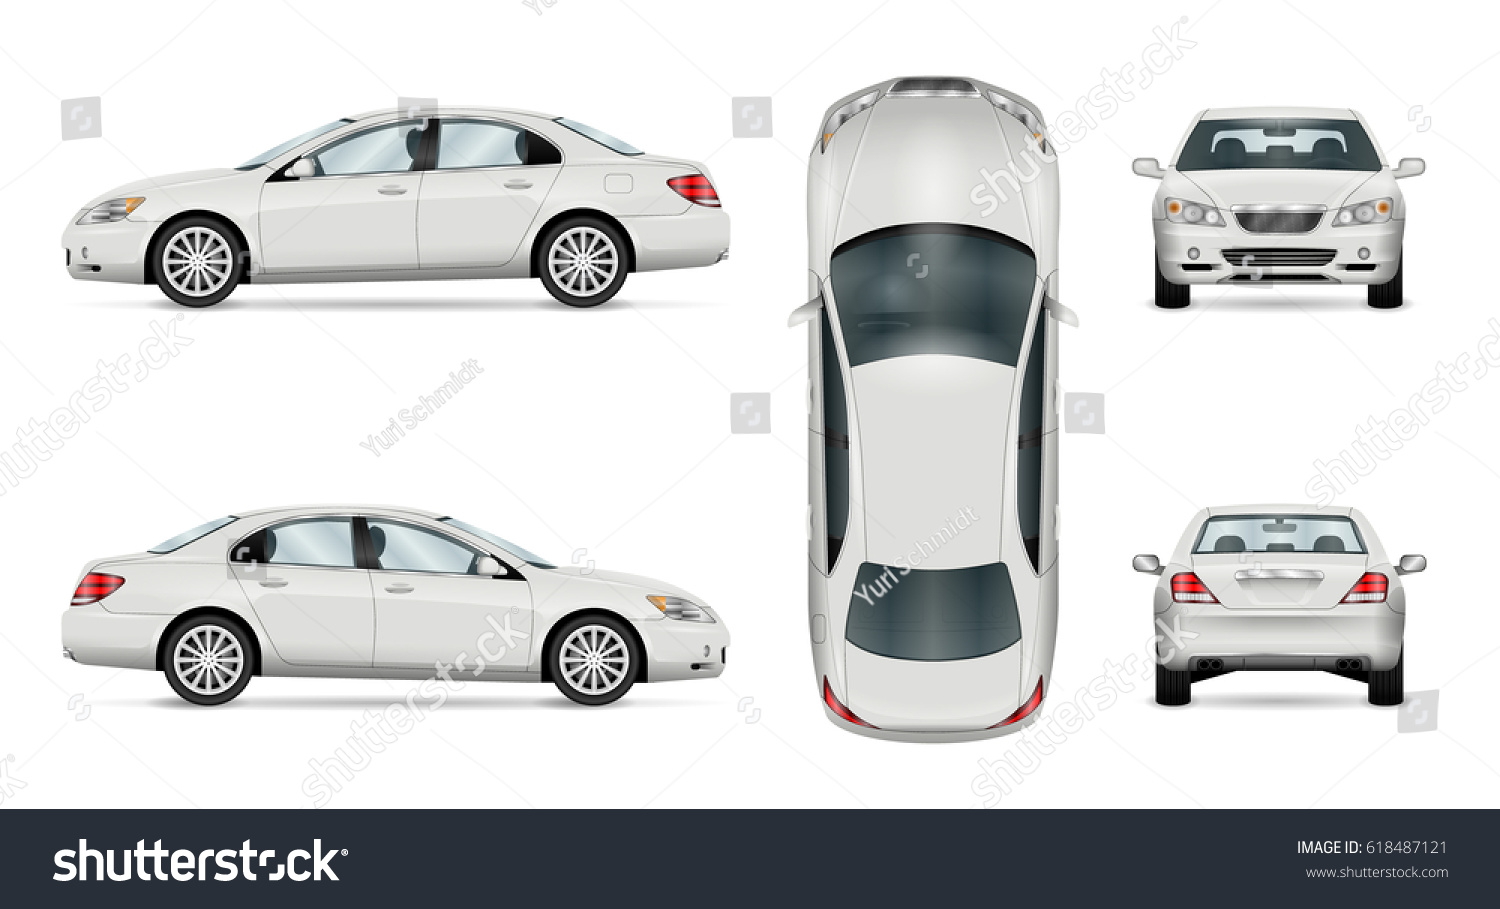 Car vector template on white background. Business sedan isolated. All layers and groups well organized for easy editing and recolor. View from side, front, back and top. #618487121